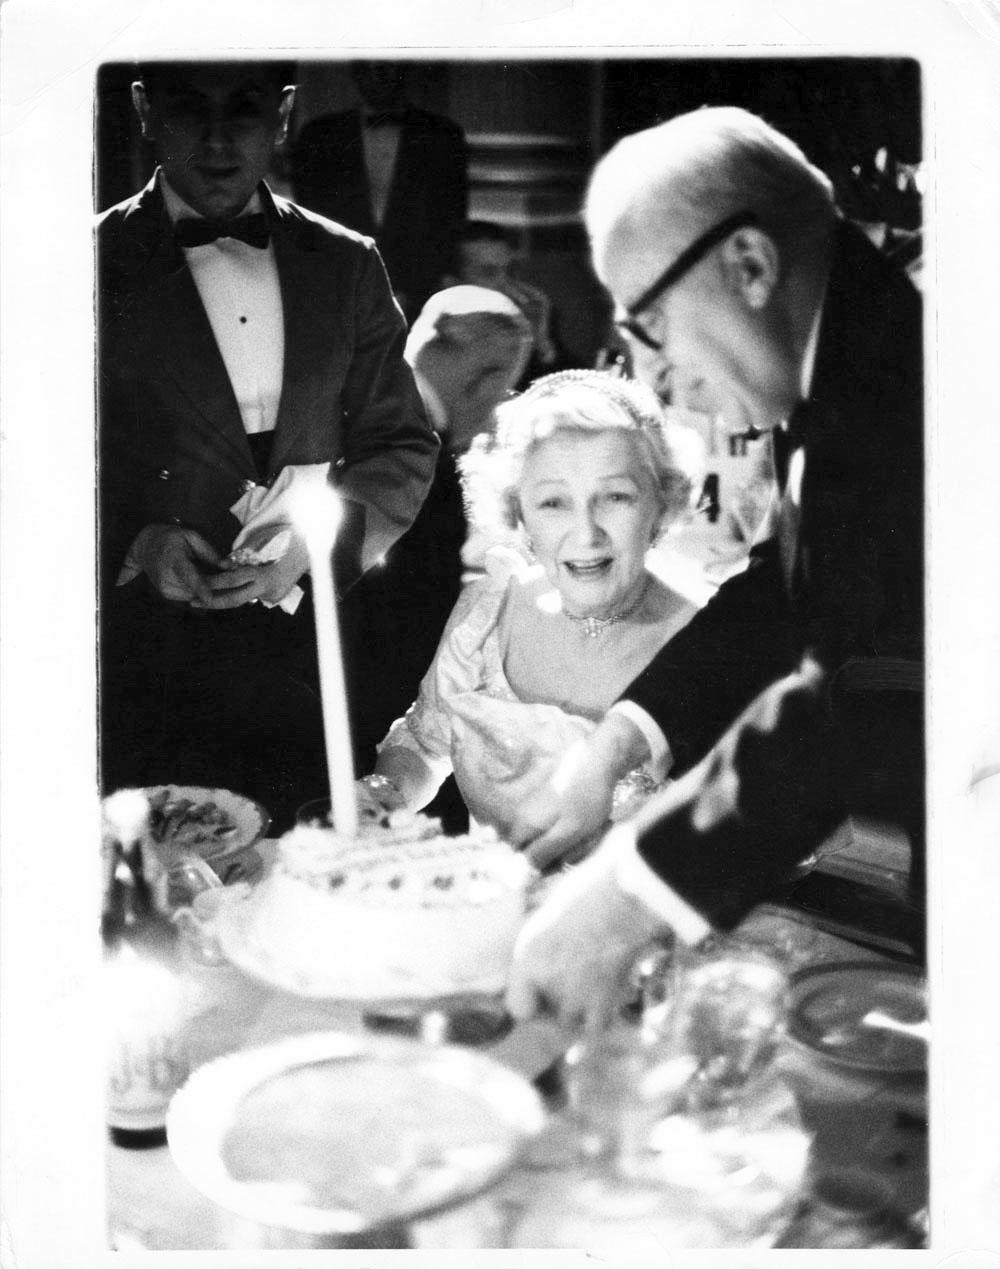 Jack Mitchell Black and White Photograph - Broadway star and dancer Irene Castle 70th Birthday at the Plaza Hotel